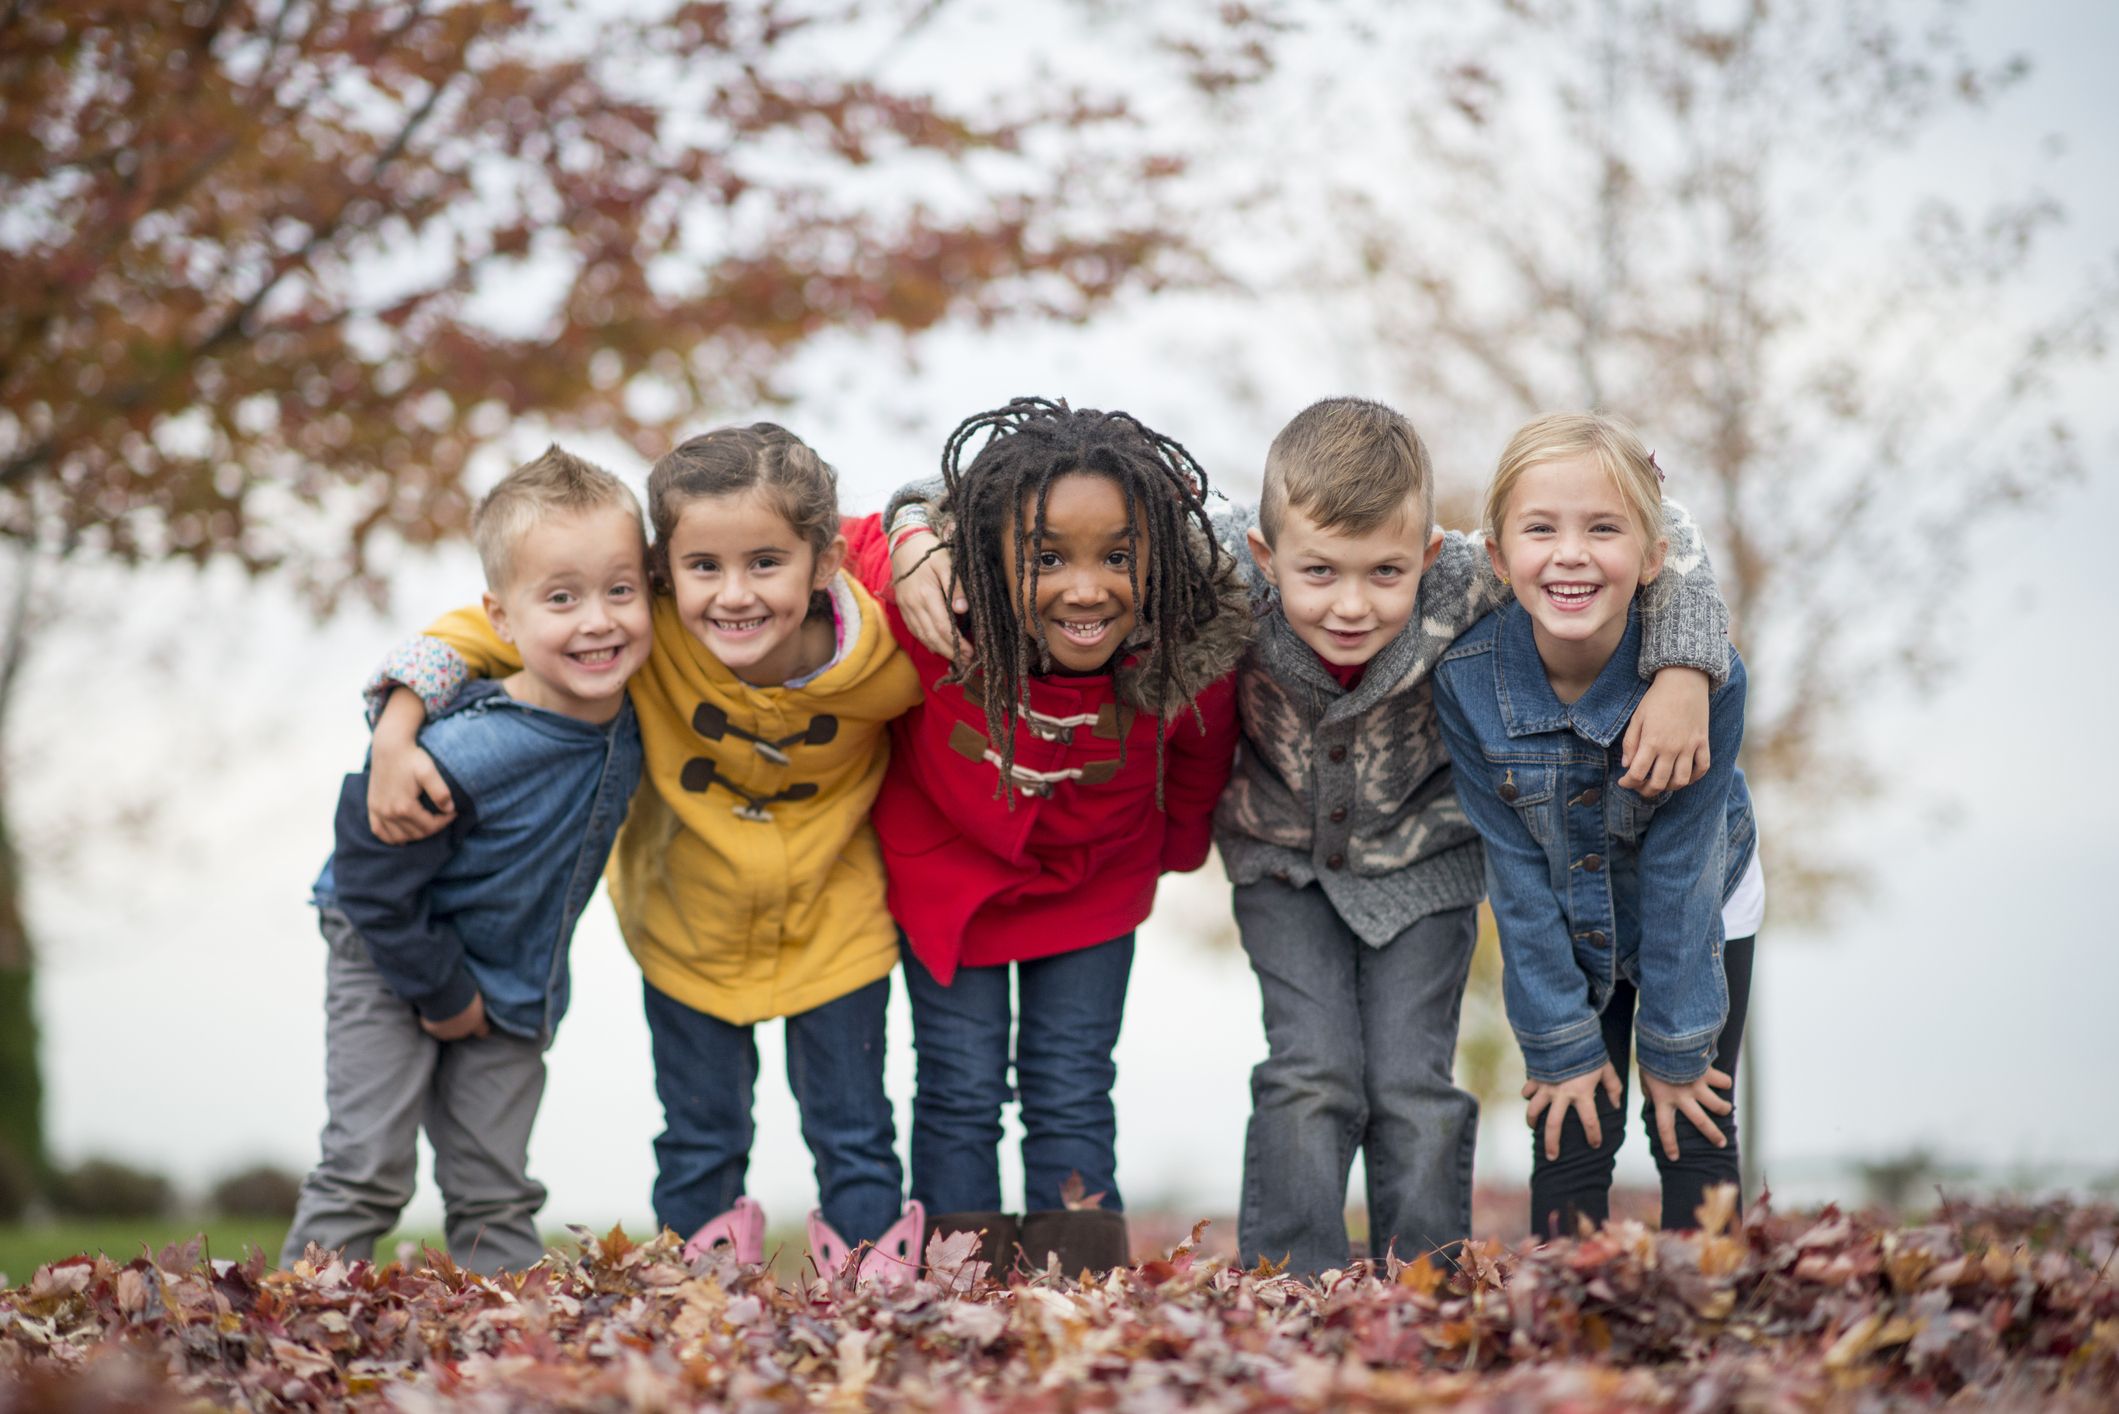 A group of five children pose outdoors.